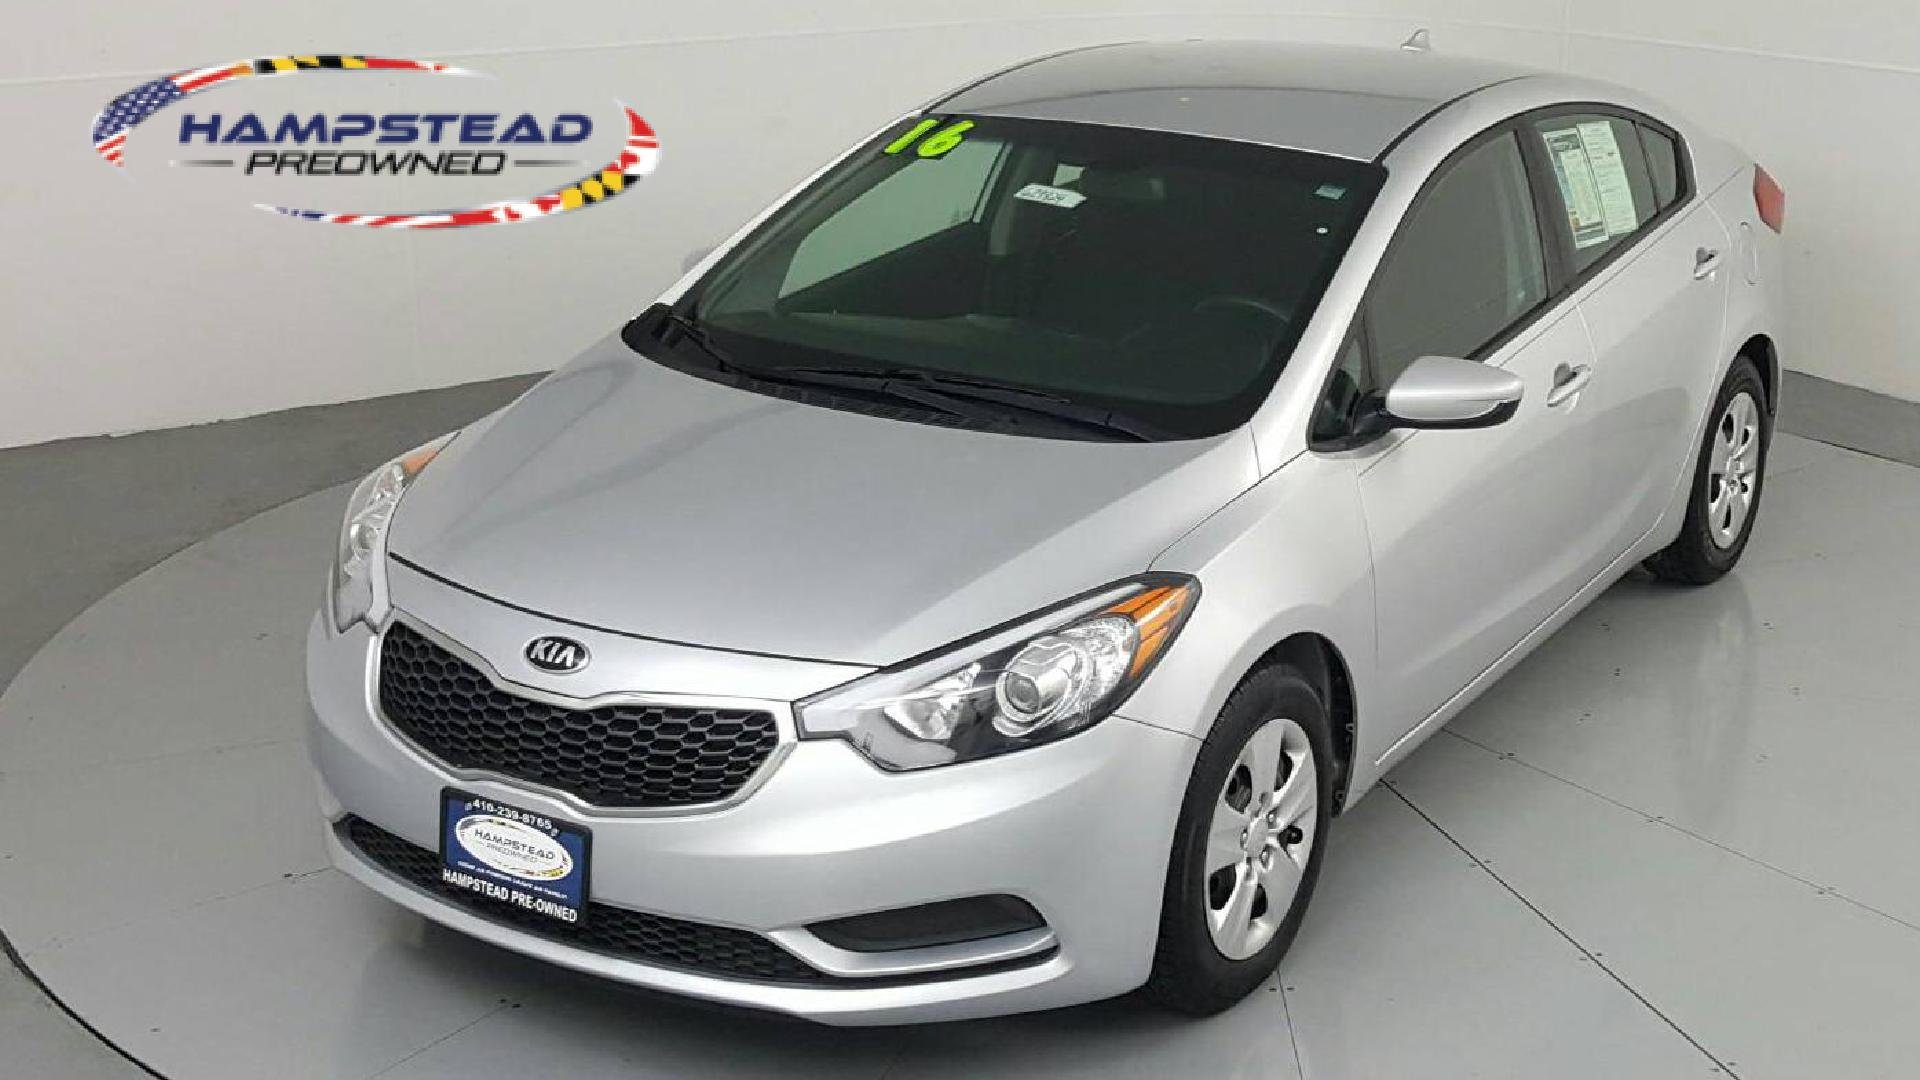 Pre-Owned 2016 KIA FORTE LX 4-door Mid-Size Passenger Car in Hampstead ...